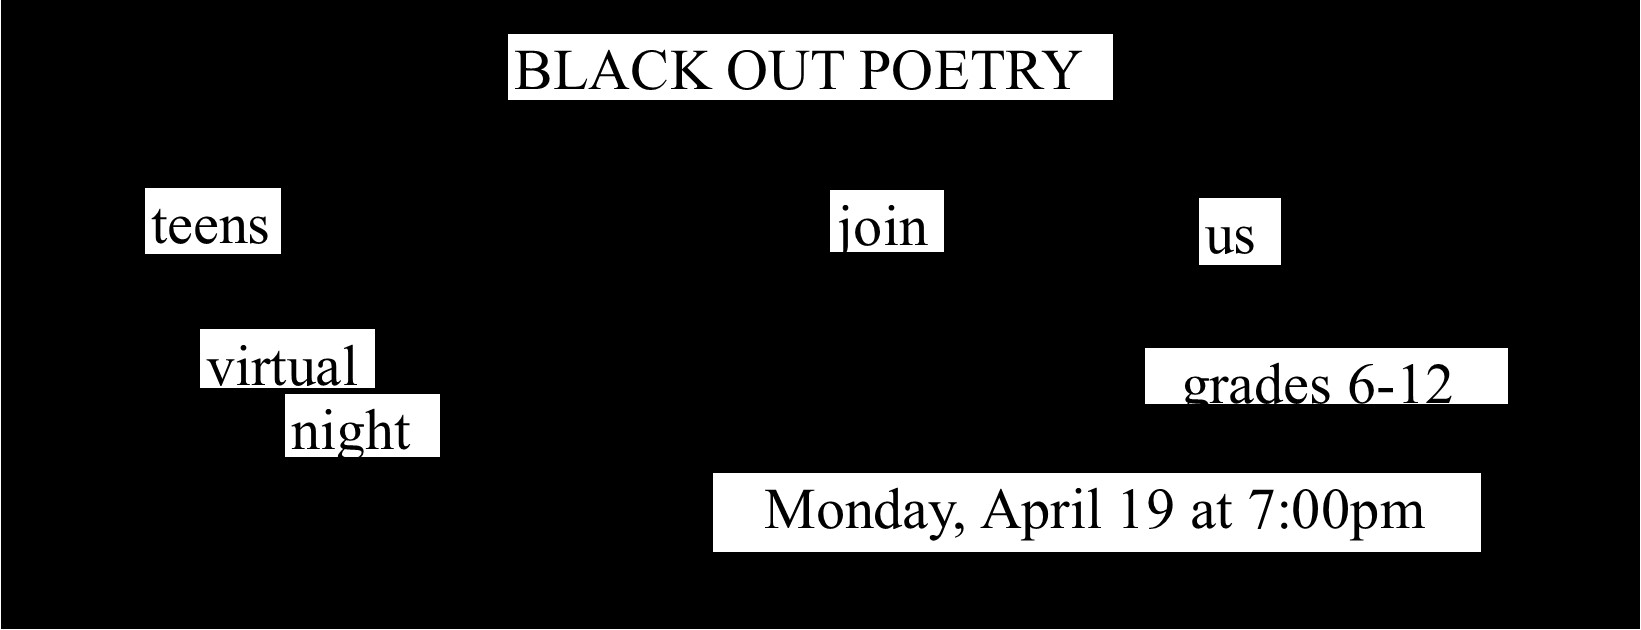 black out poetry 